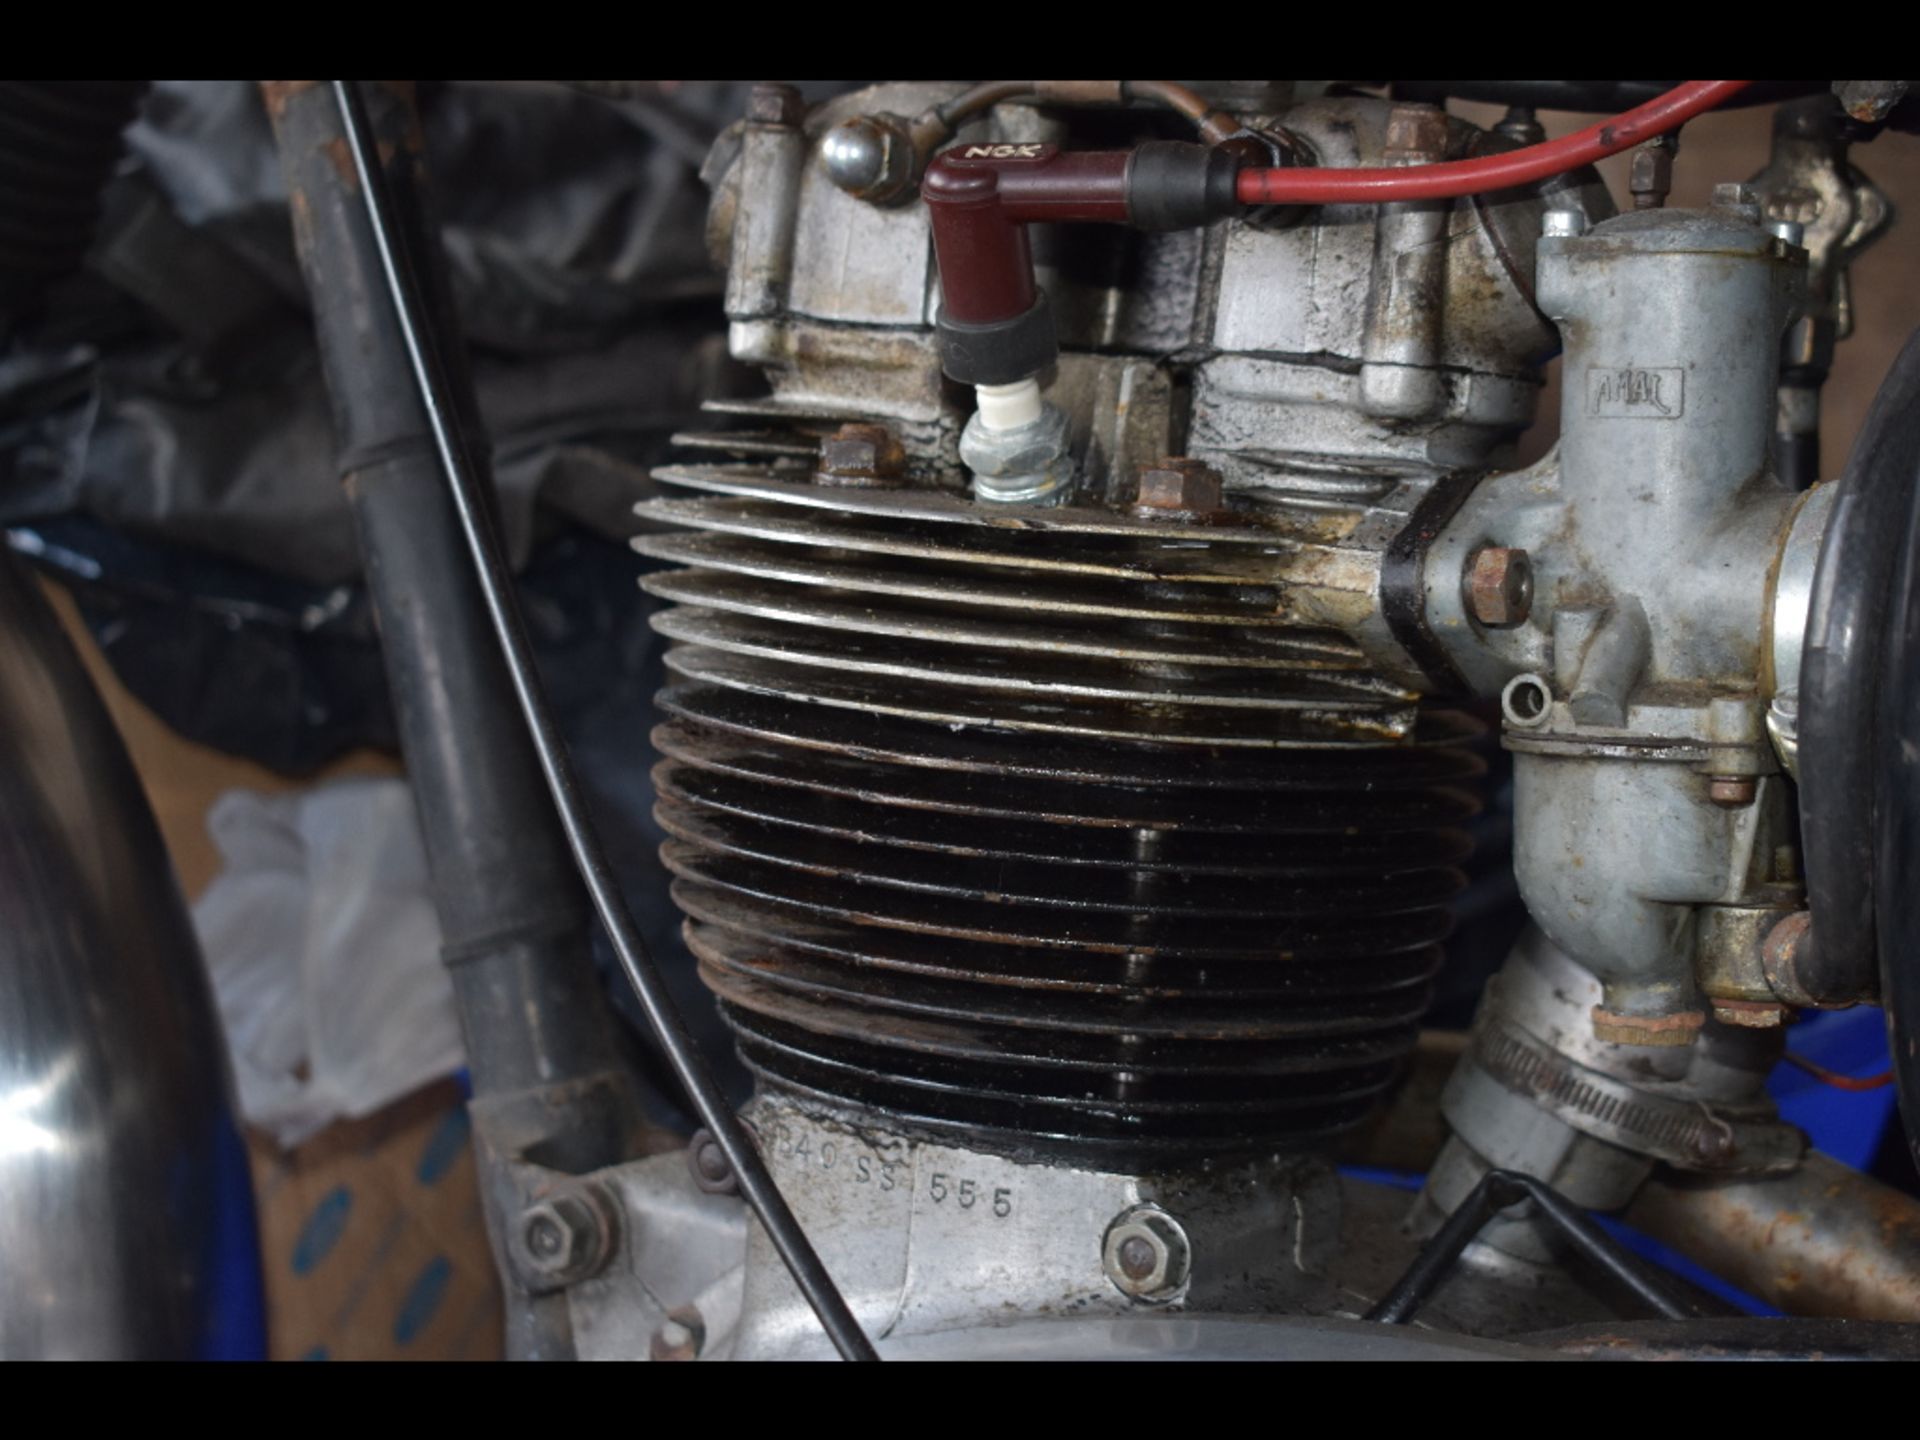 A 1964 BSA B40, registration number AHM 52B, frame number 2780, engine number SS555. From a - Image 3 of 6